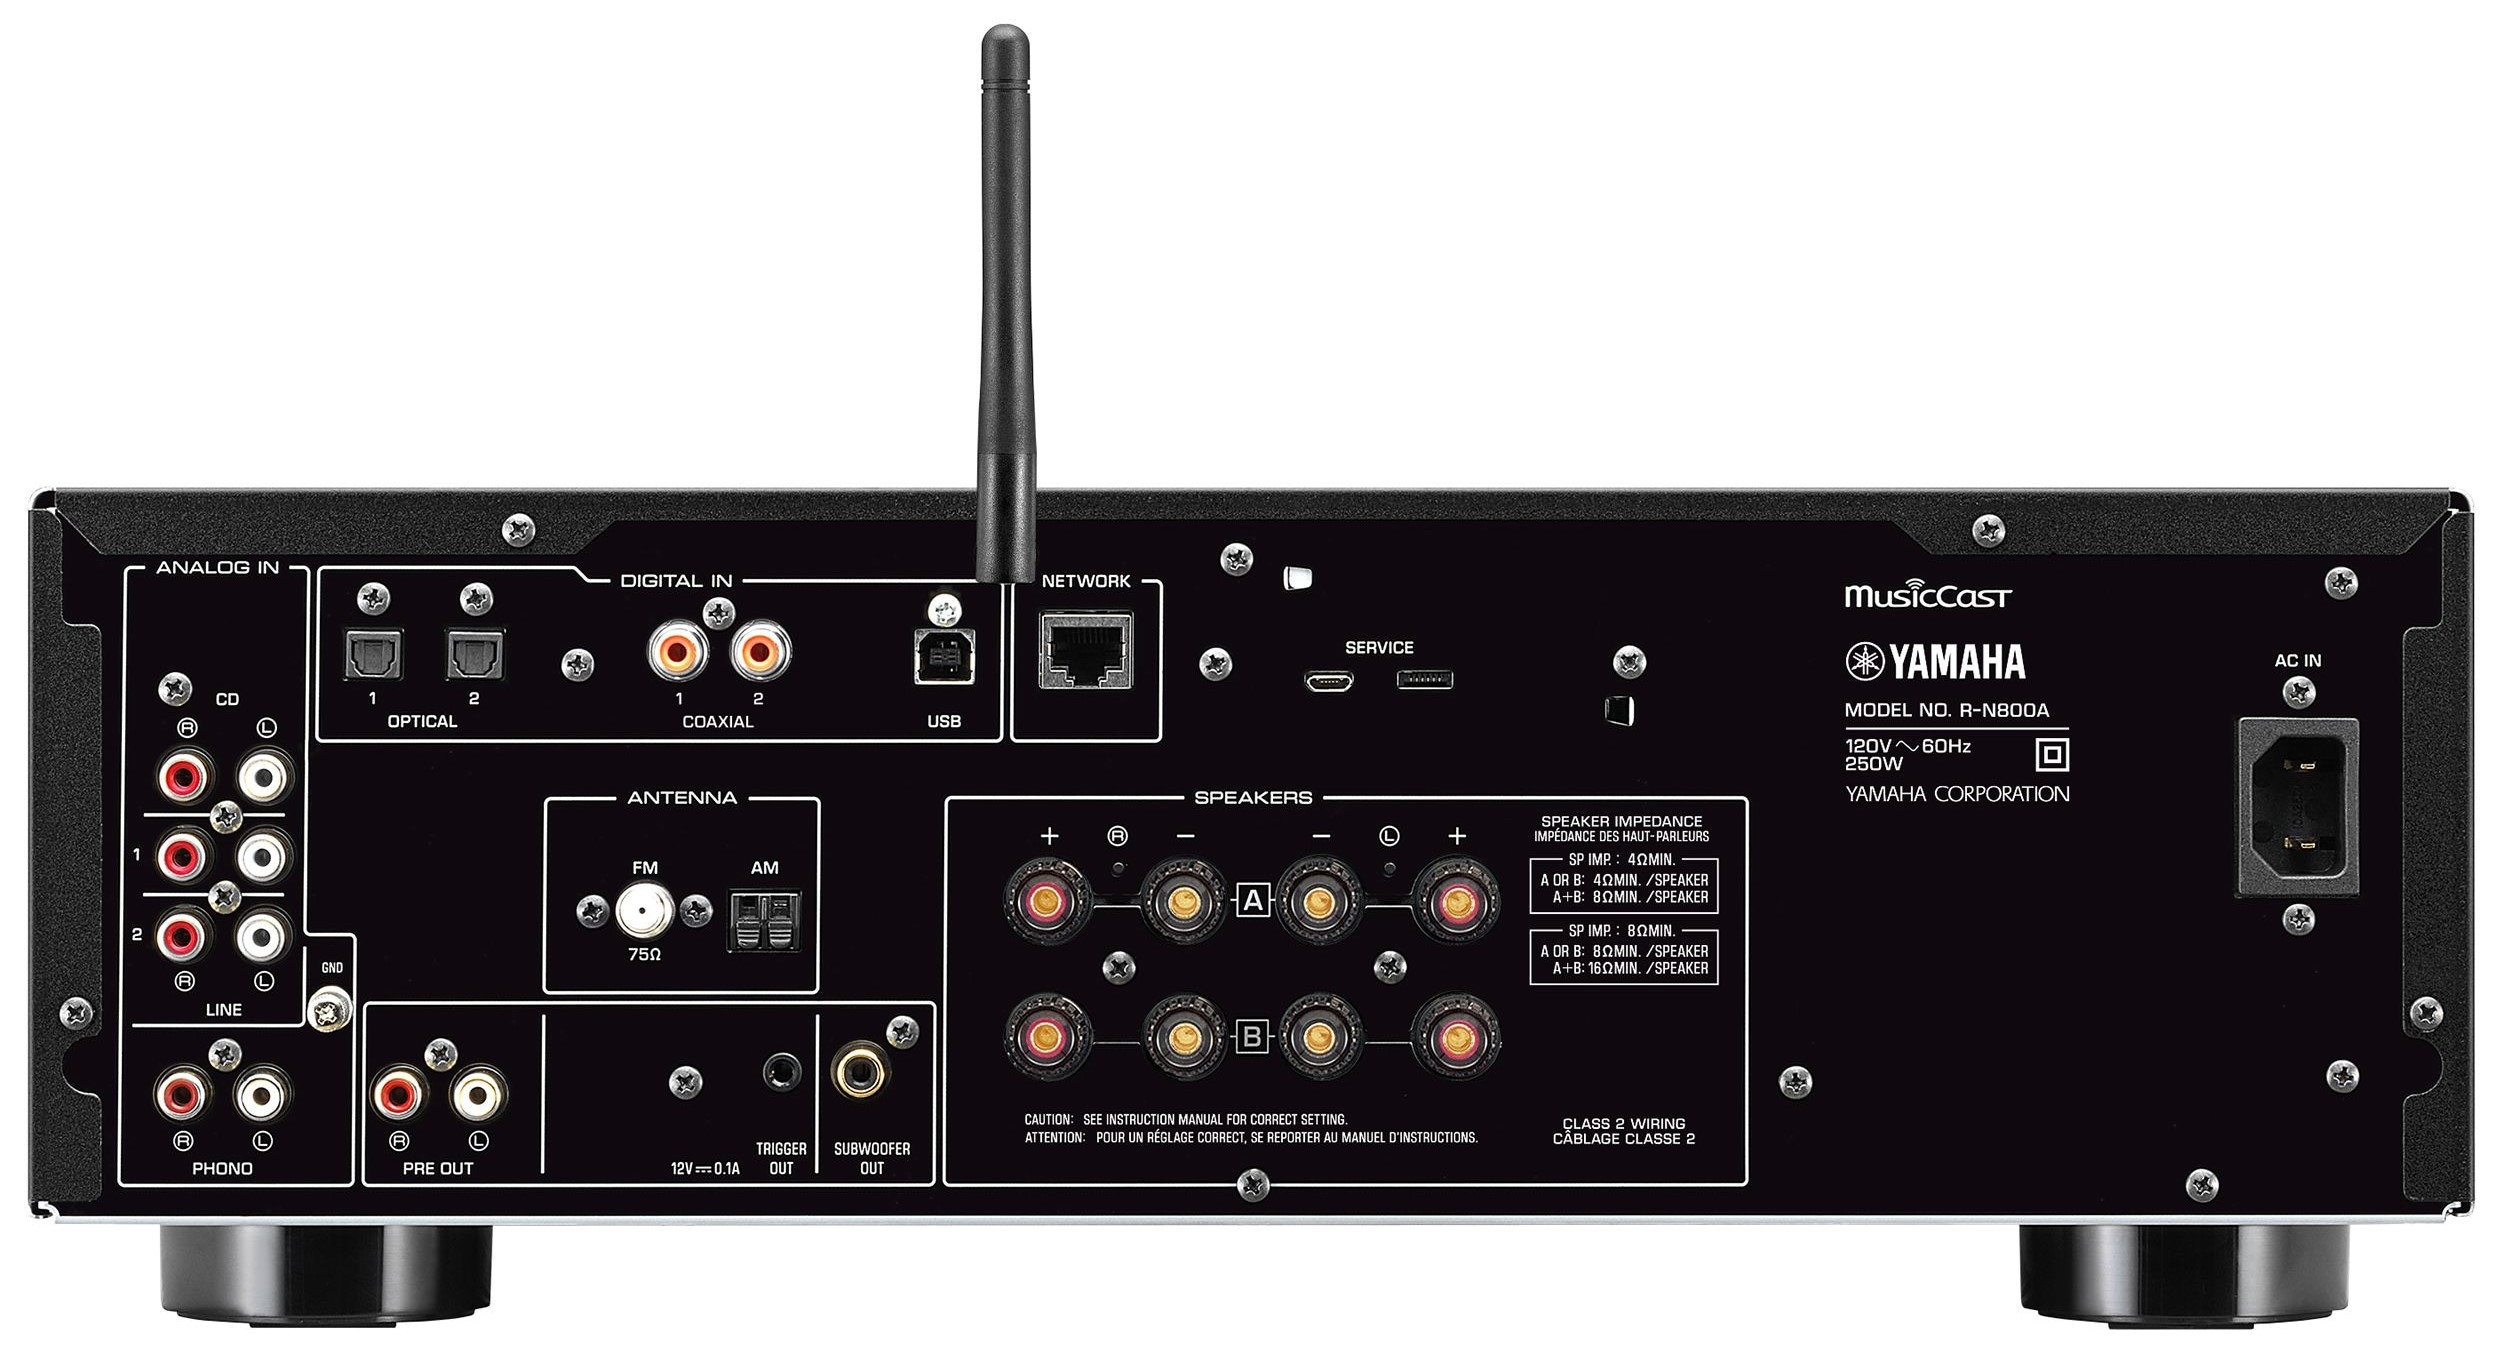 Image of receiver.